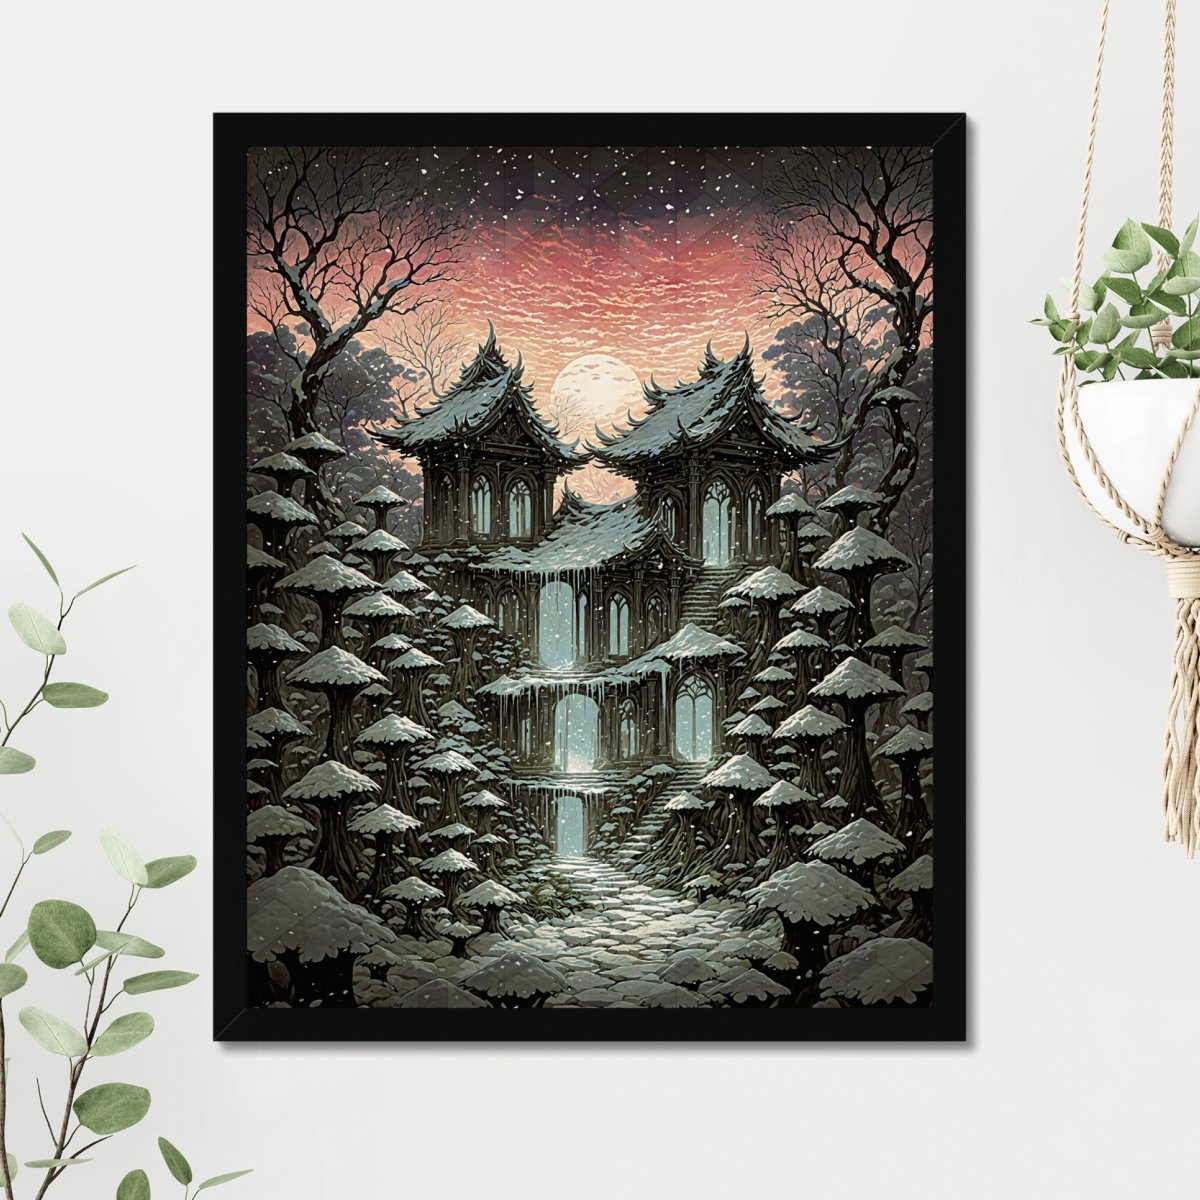 Frozen keep ruin - Art print - Poster - Ever colorful